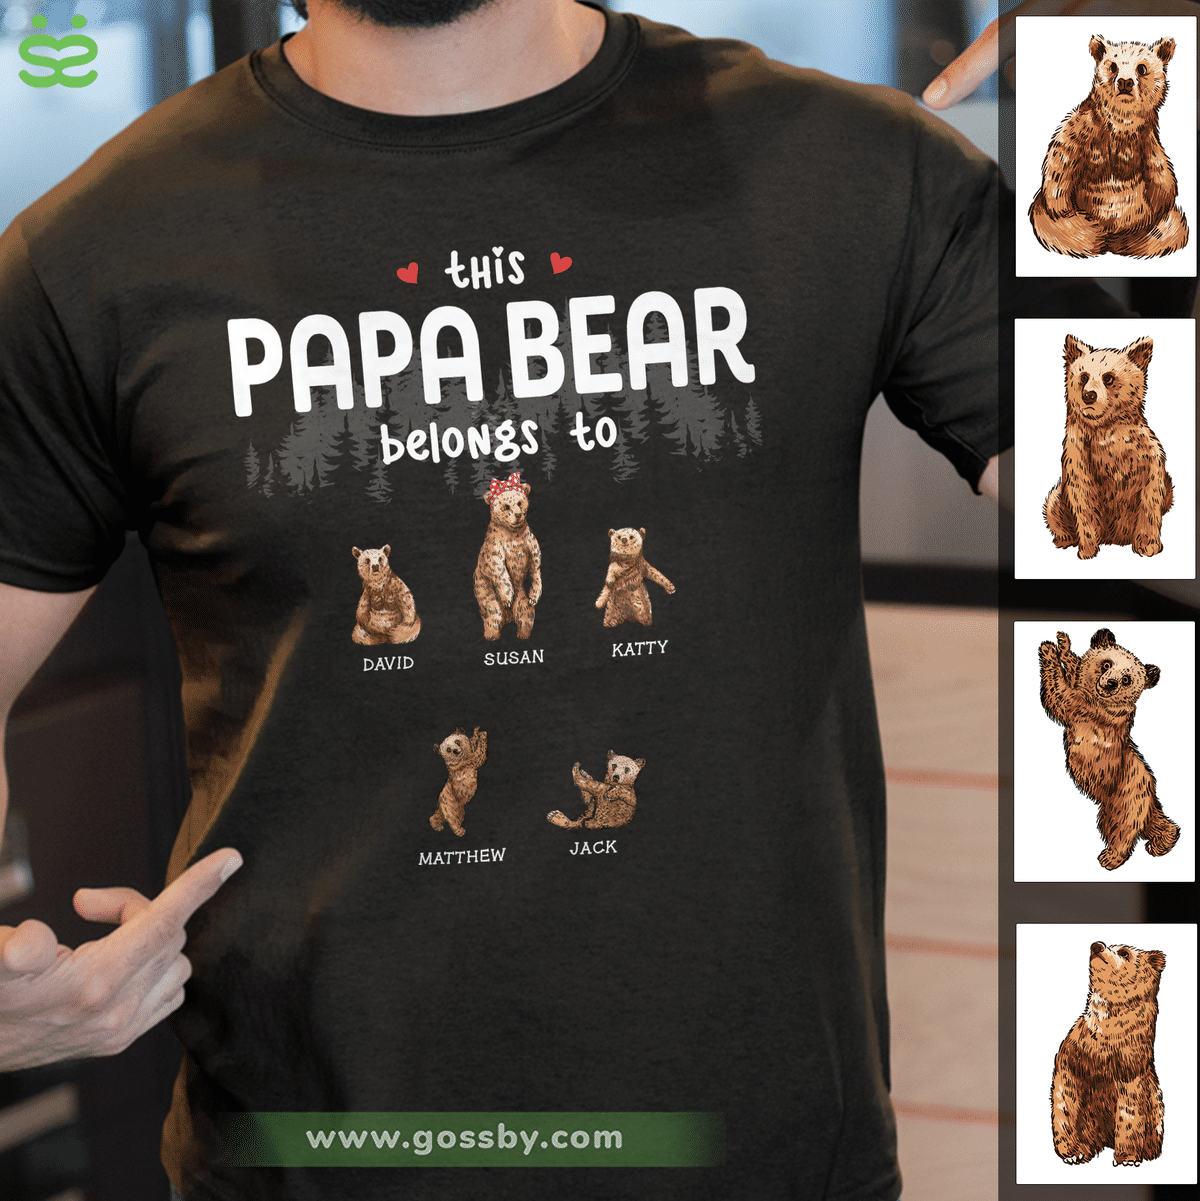 Papa Bear - This PaPa Bear belongs to (Up to 10 Members) Father's Day Gift, Gifts For Dad, Daughter, Son - Personalized Shirt_1